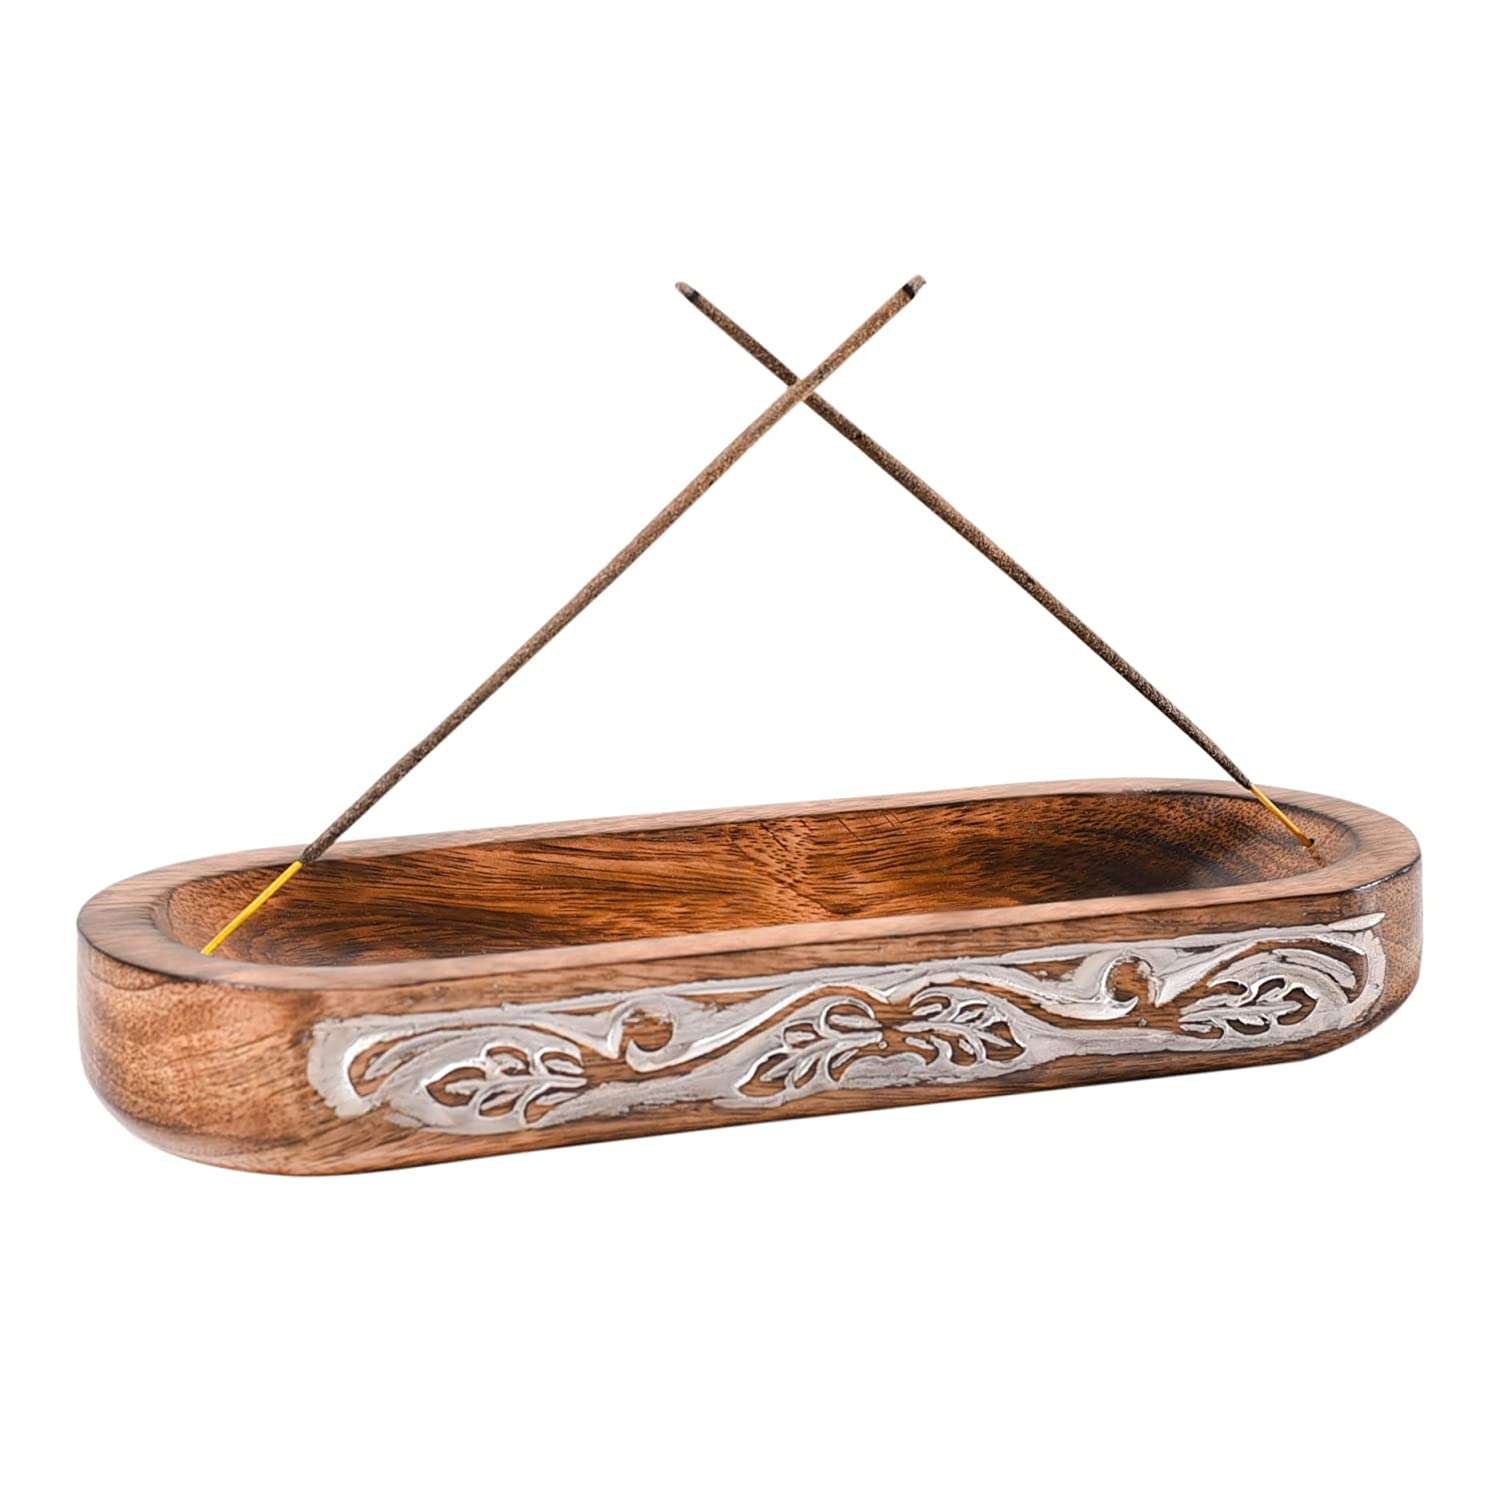 Fine Handcarved Wooden Incense Holder | Insence Ash Catcher | Insense Stick Holder for Table Décorations | Wooden Incense Tray for Sticks